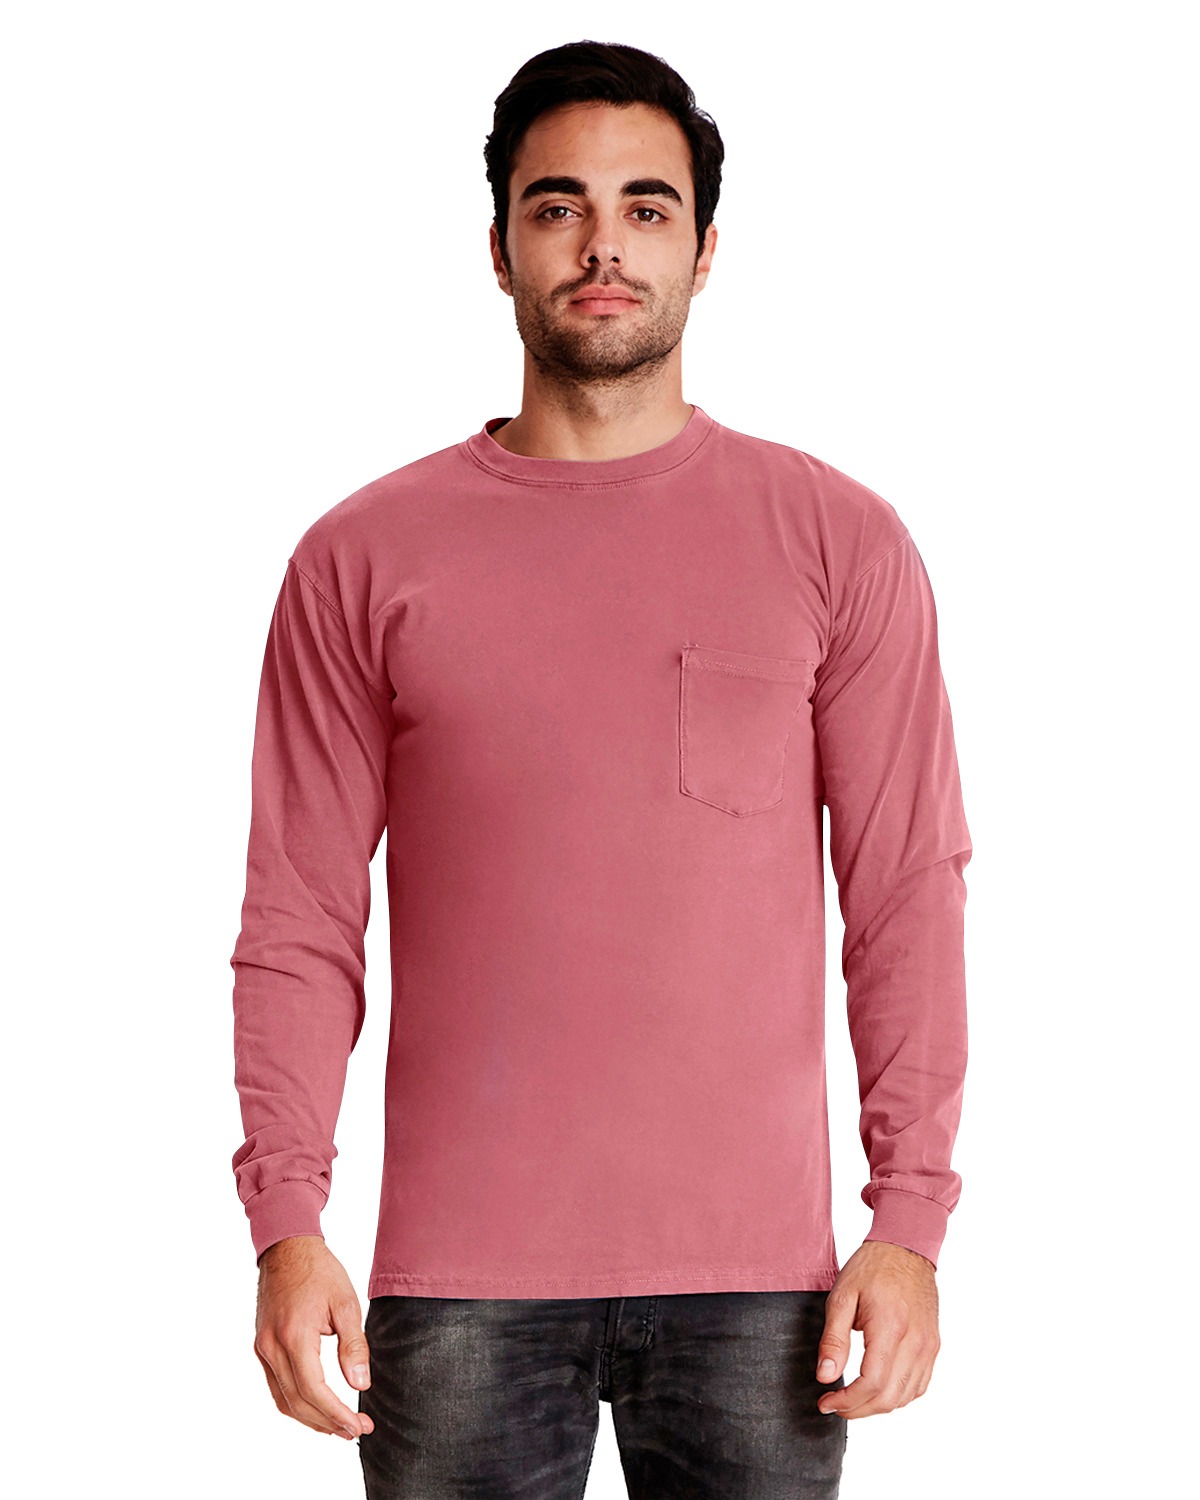 Next Level Adult Inspired Dye Long-Sleeve Crew with Pocket